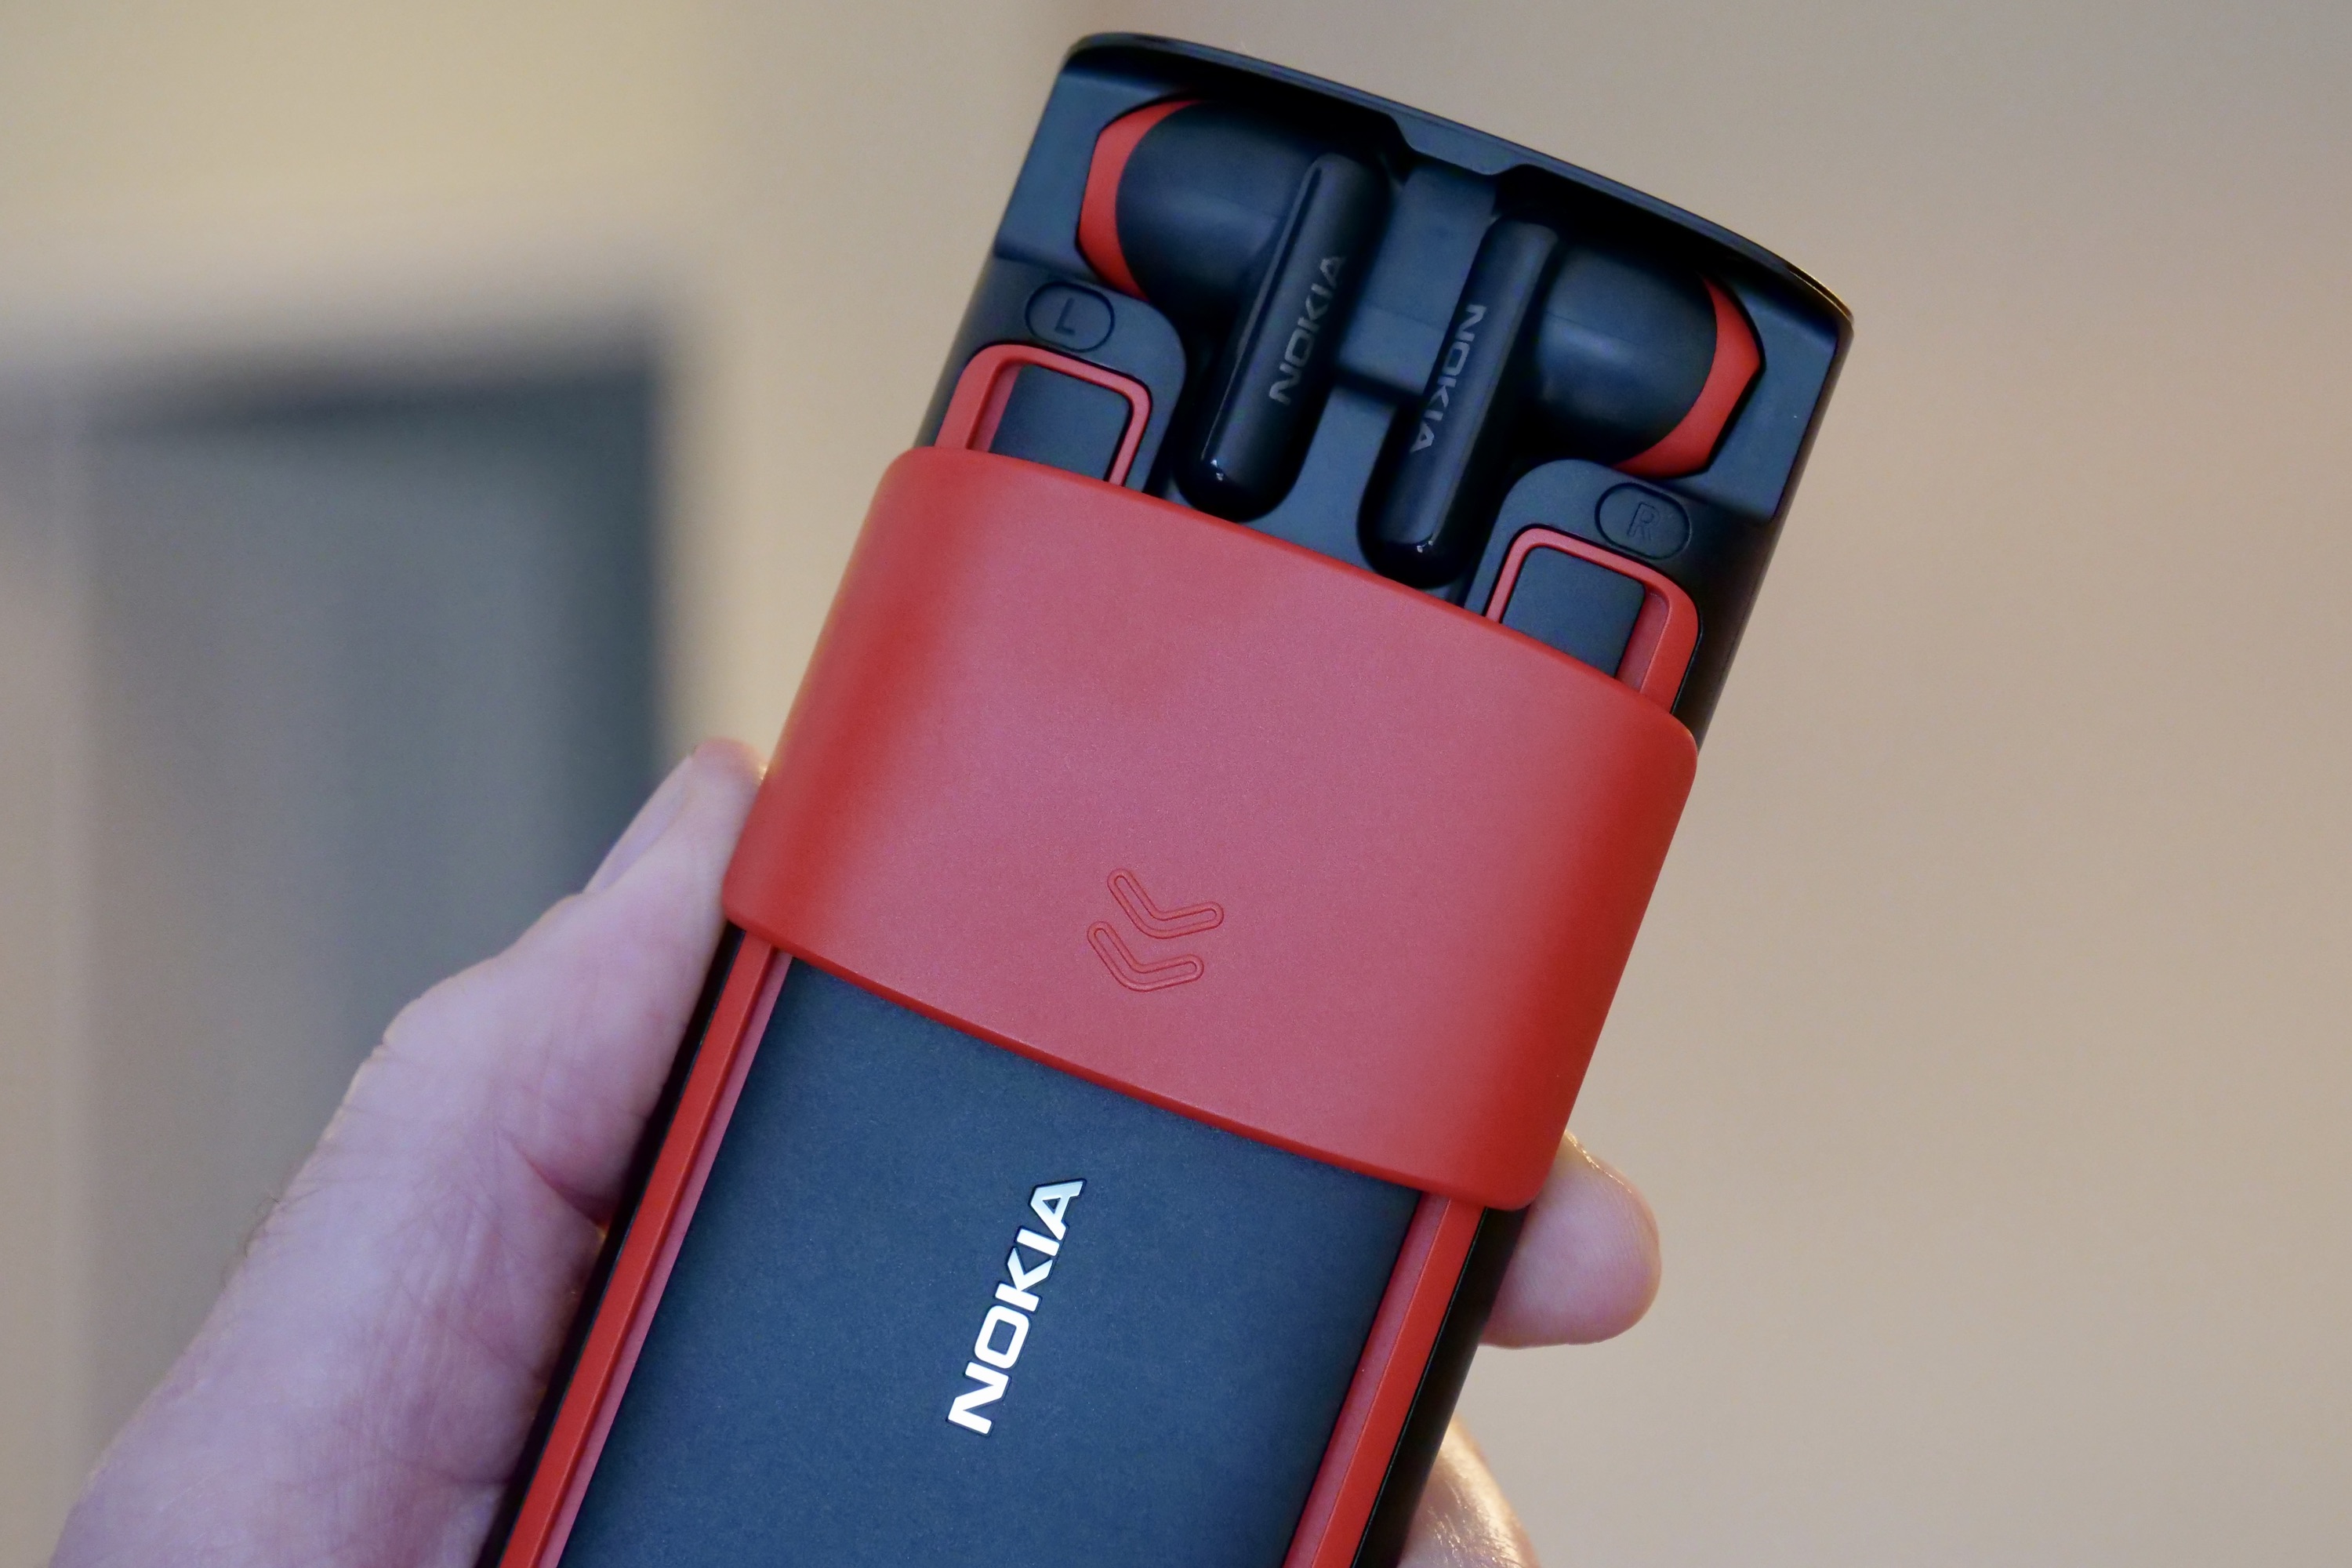 The open earbuds compartment on the Nokia 5710 XpressAudio.